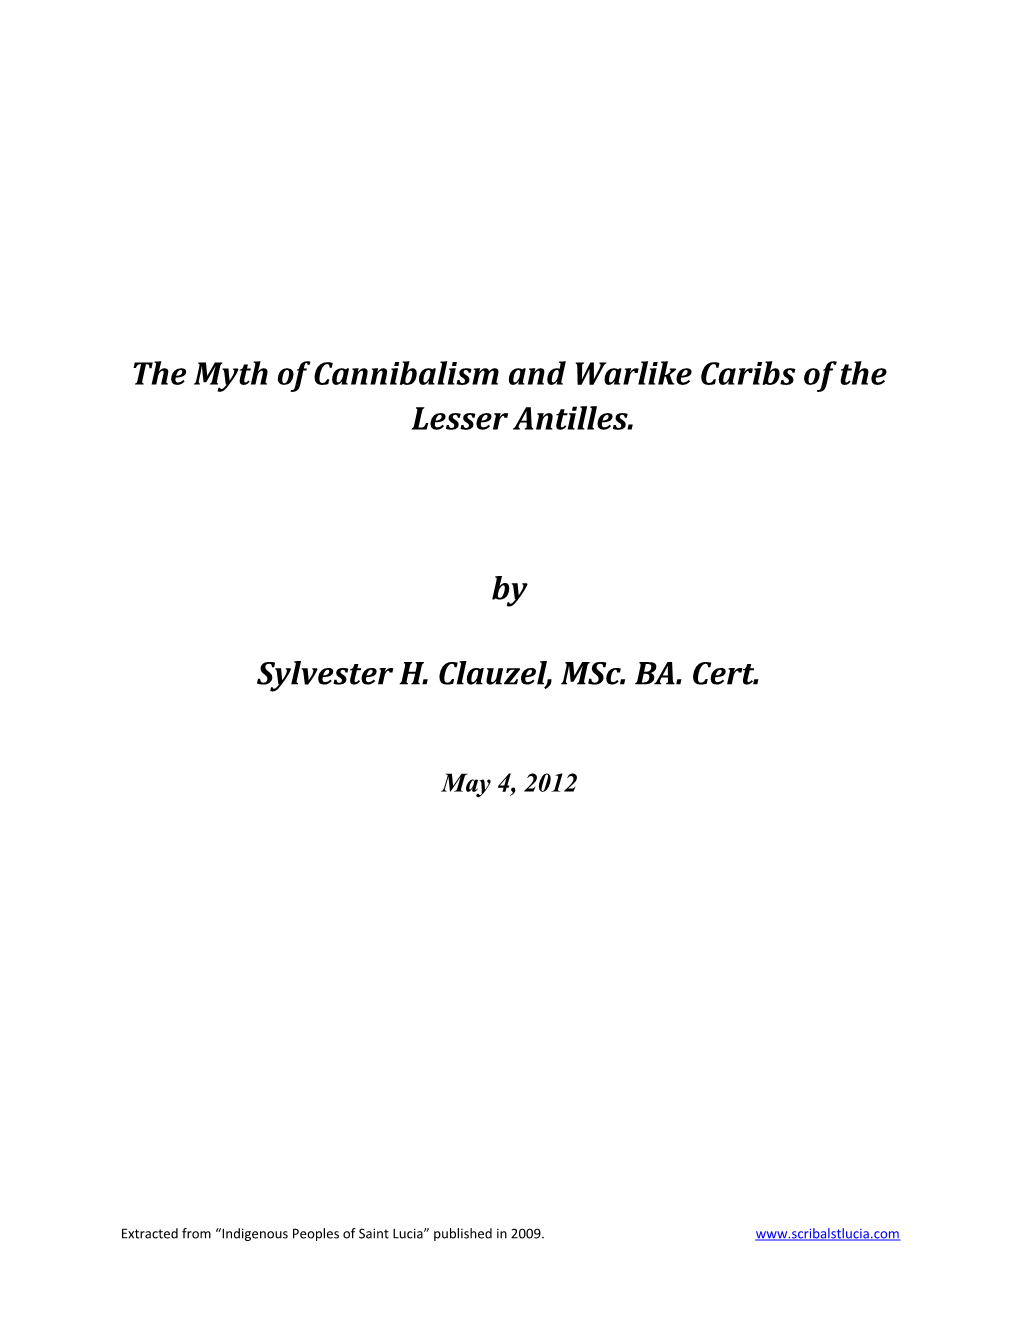 The Myth of Cannibalism and Warlike Caribs of the Lesser Antilles